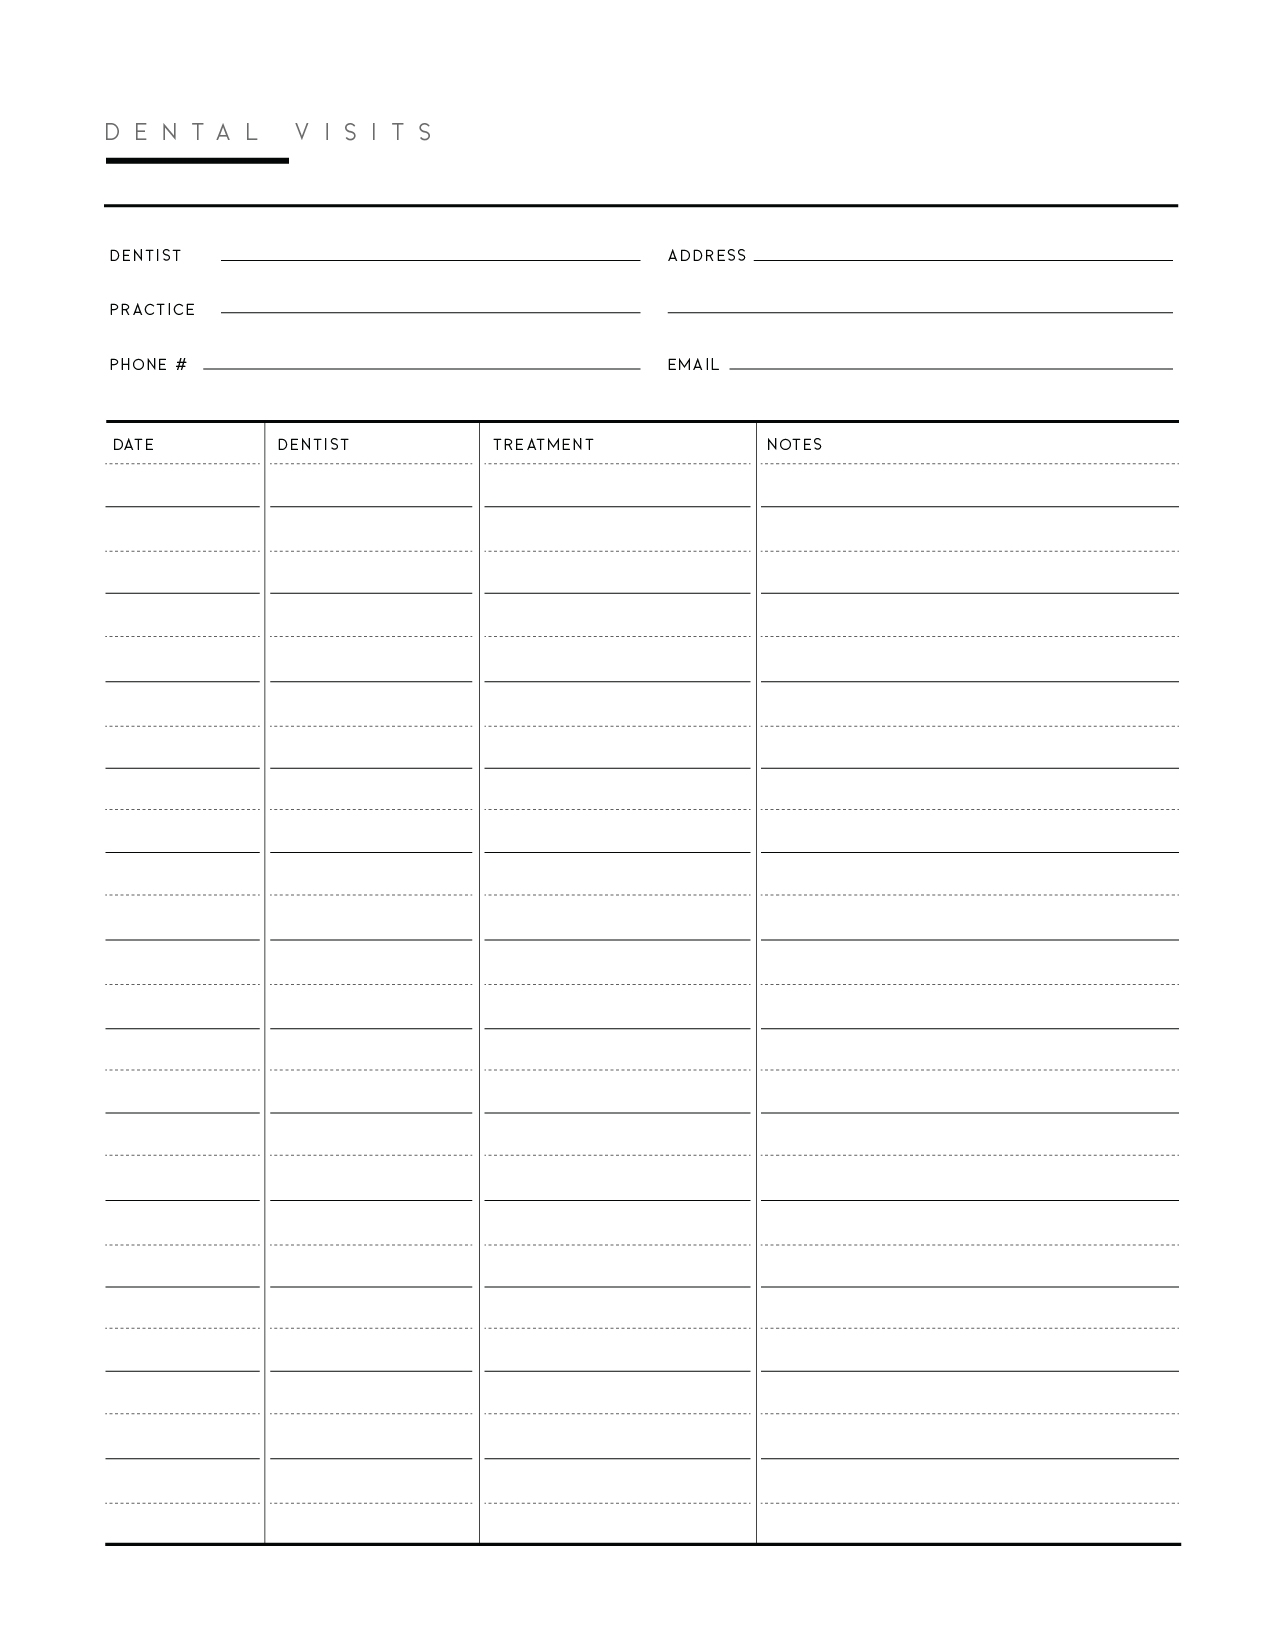 Download Dental Record Template PDF World Of Printables